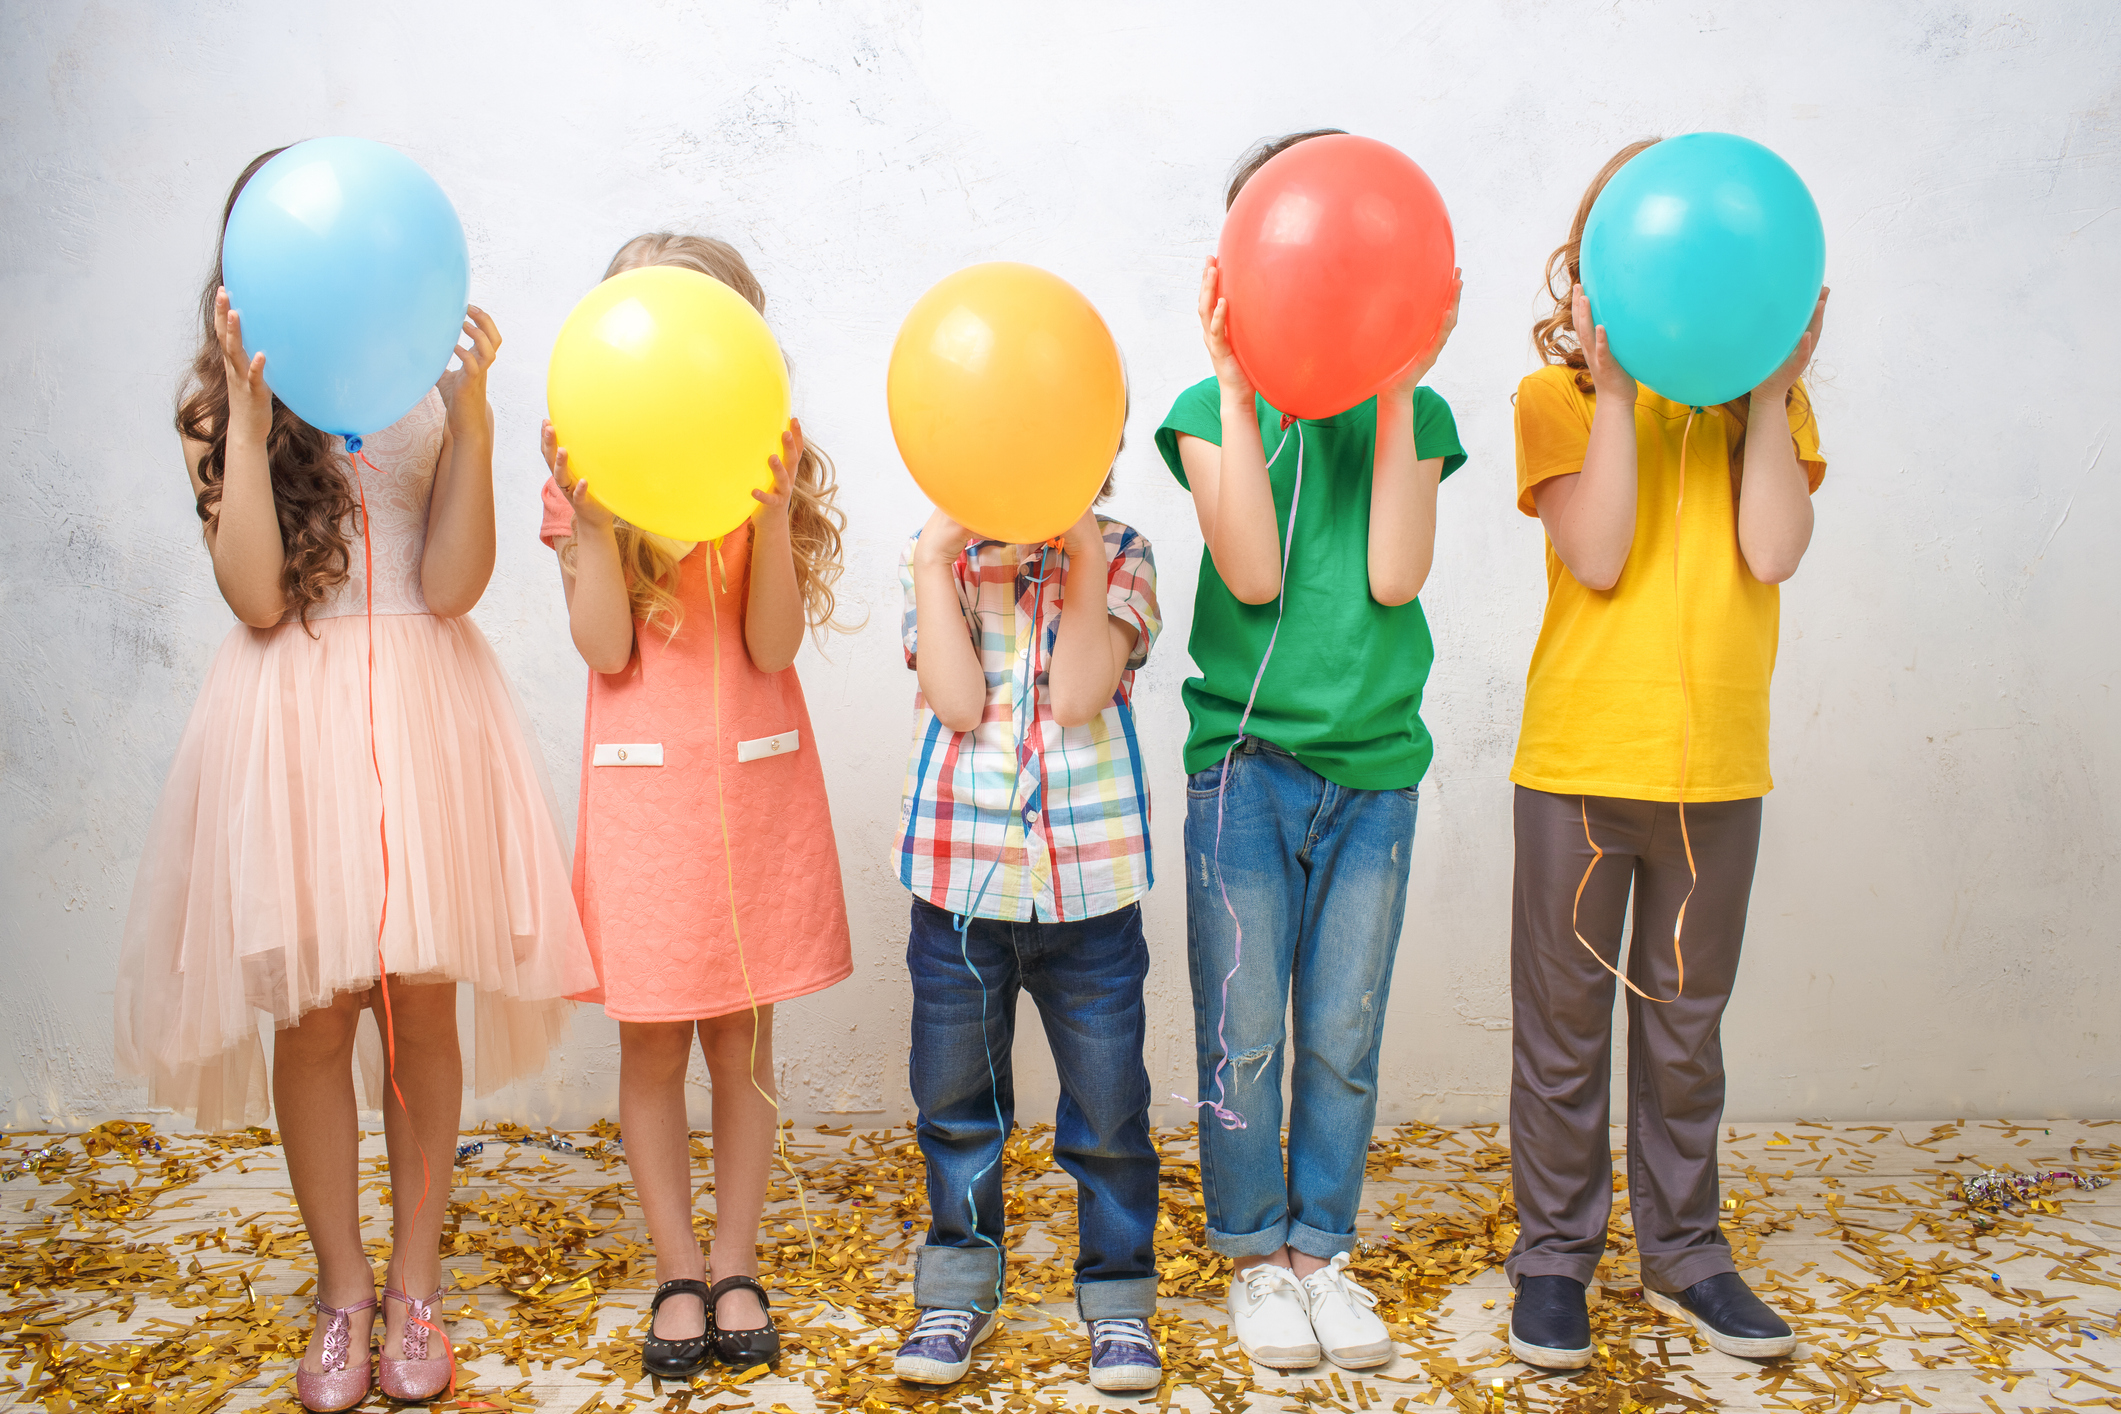 Five kids hold balloons to their faces as they prepare to play a musical game